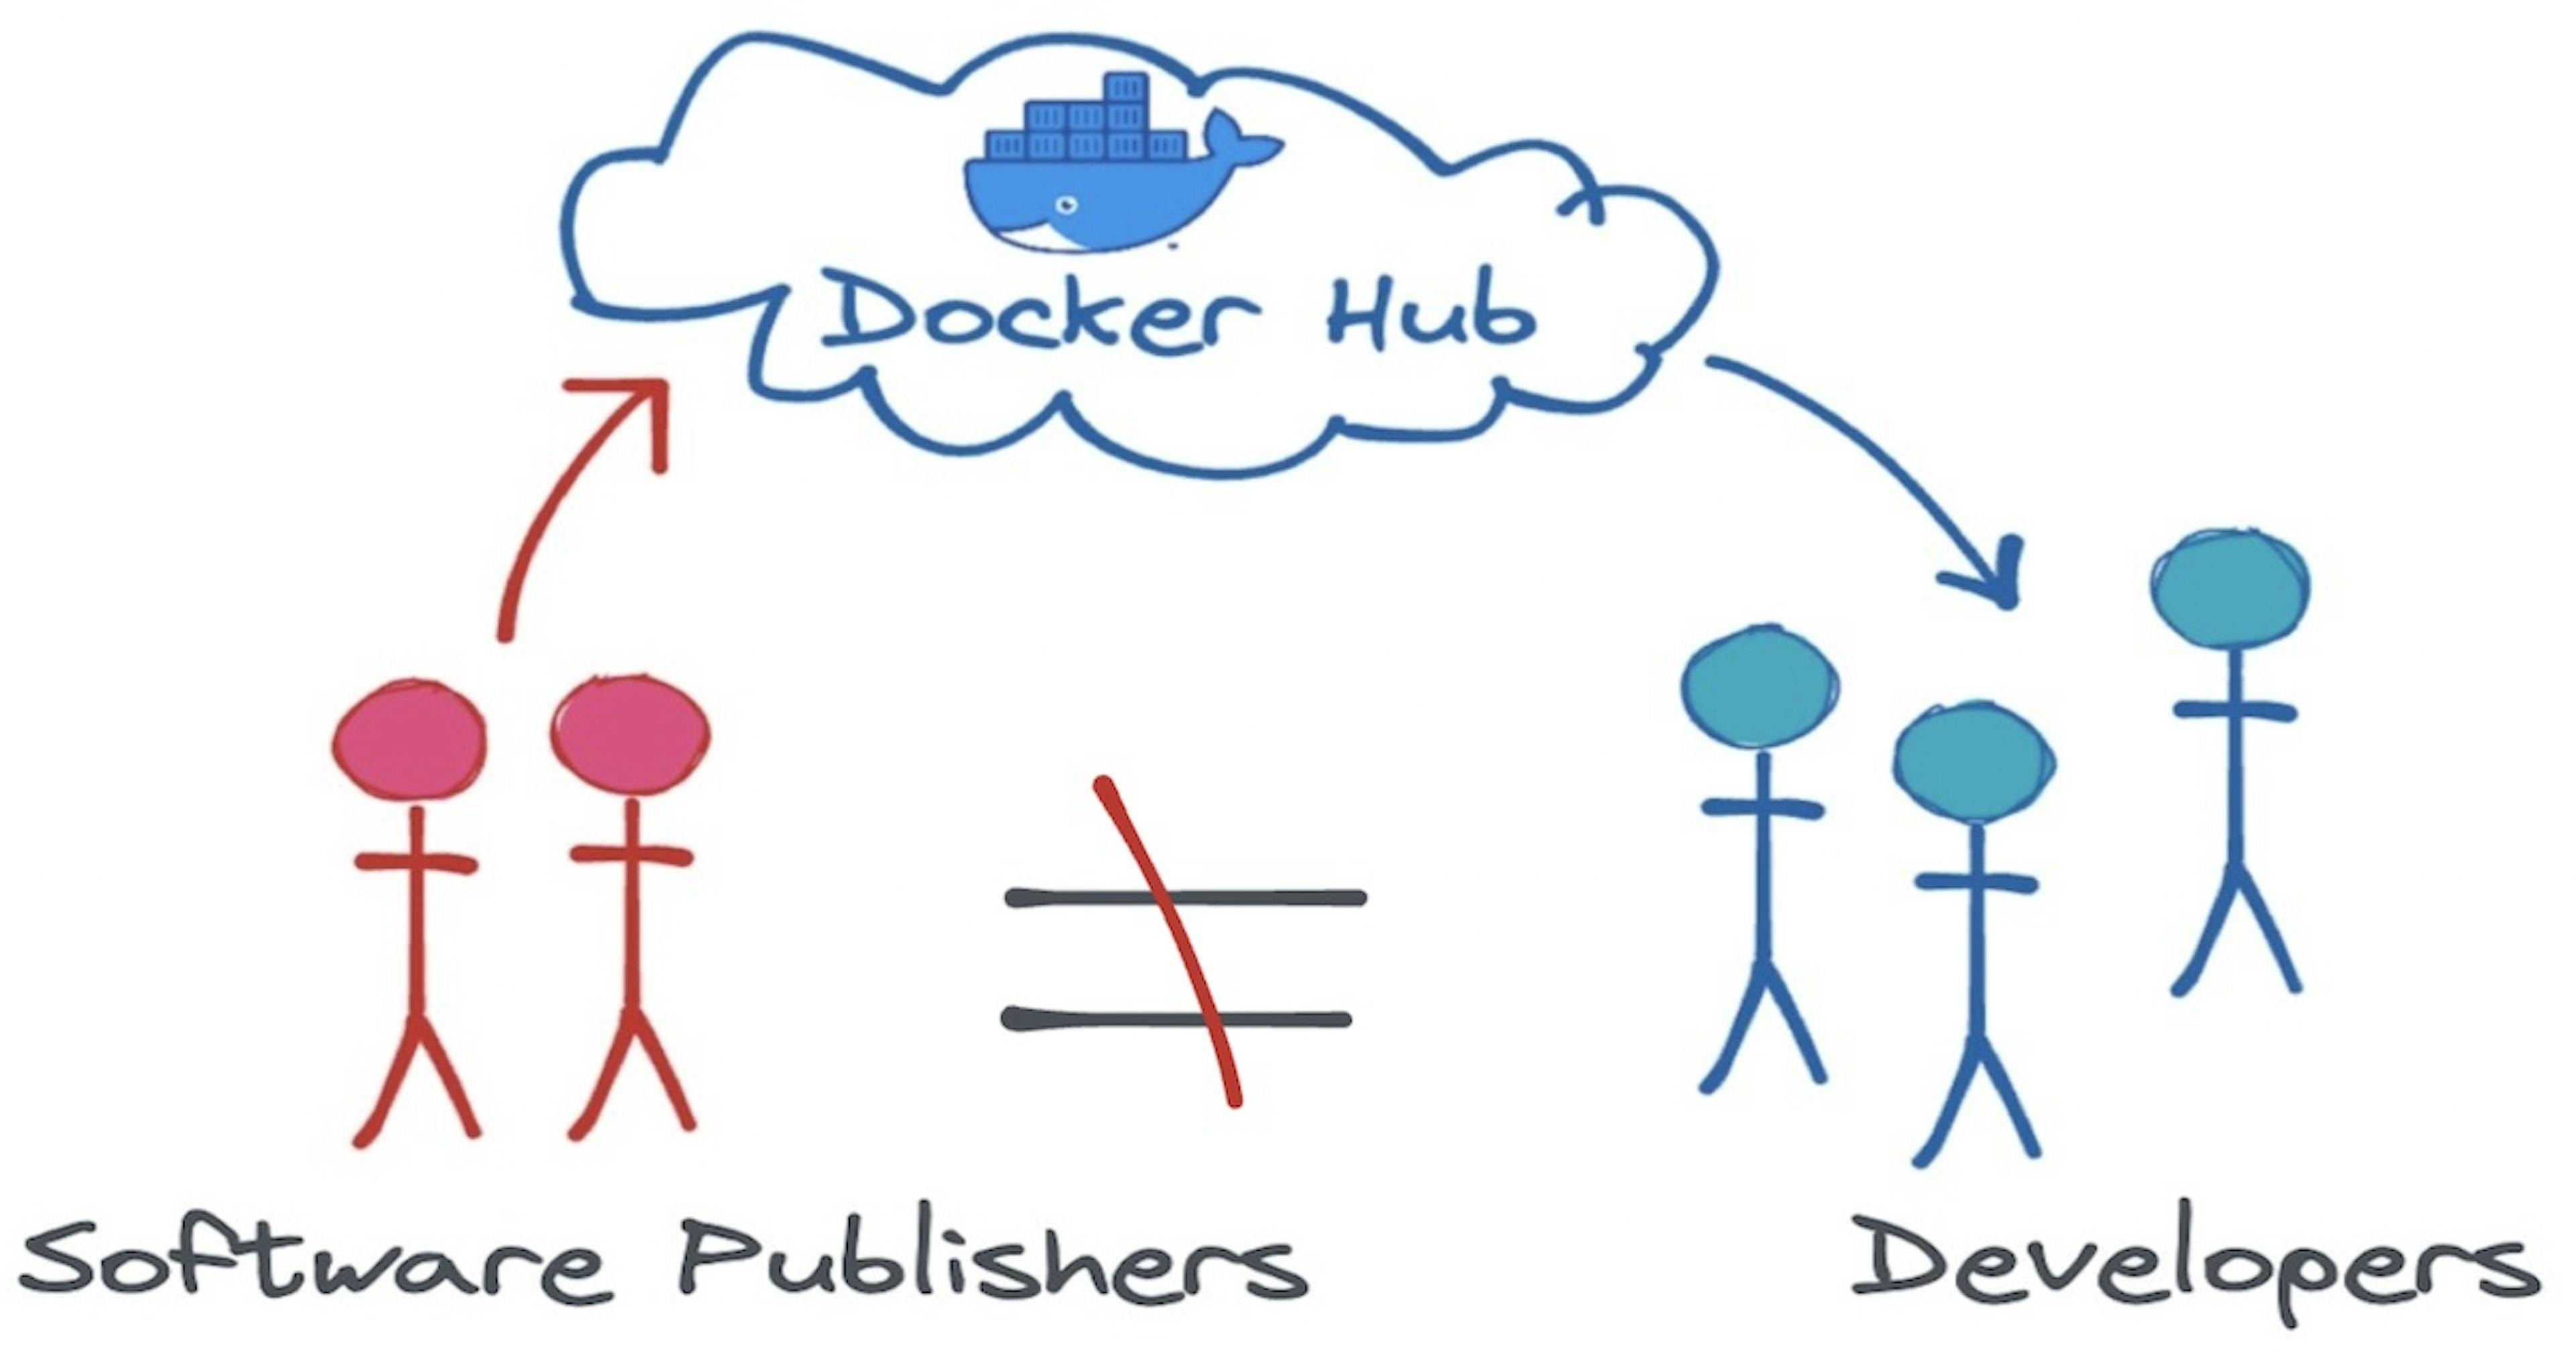 Software publishers do not always have the same perspective as software developers...